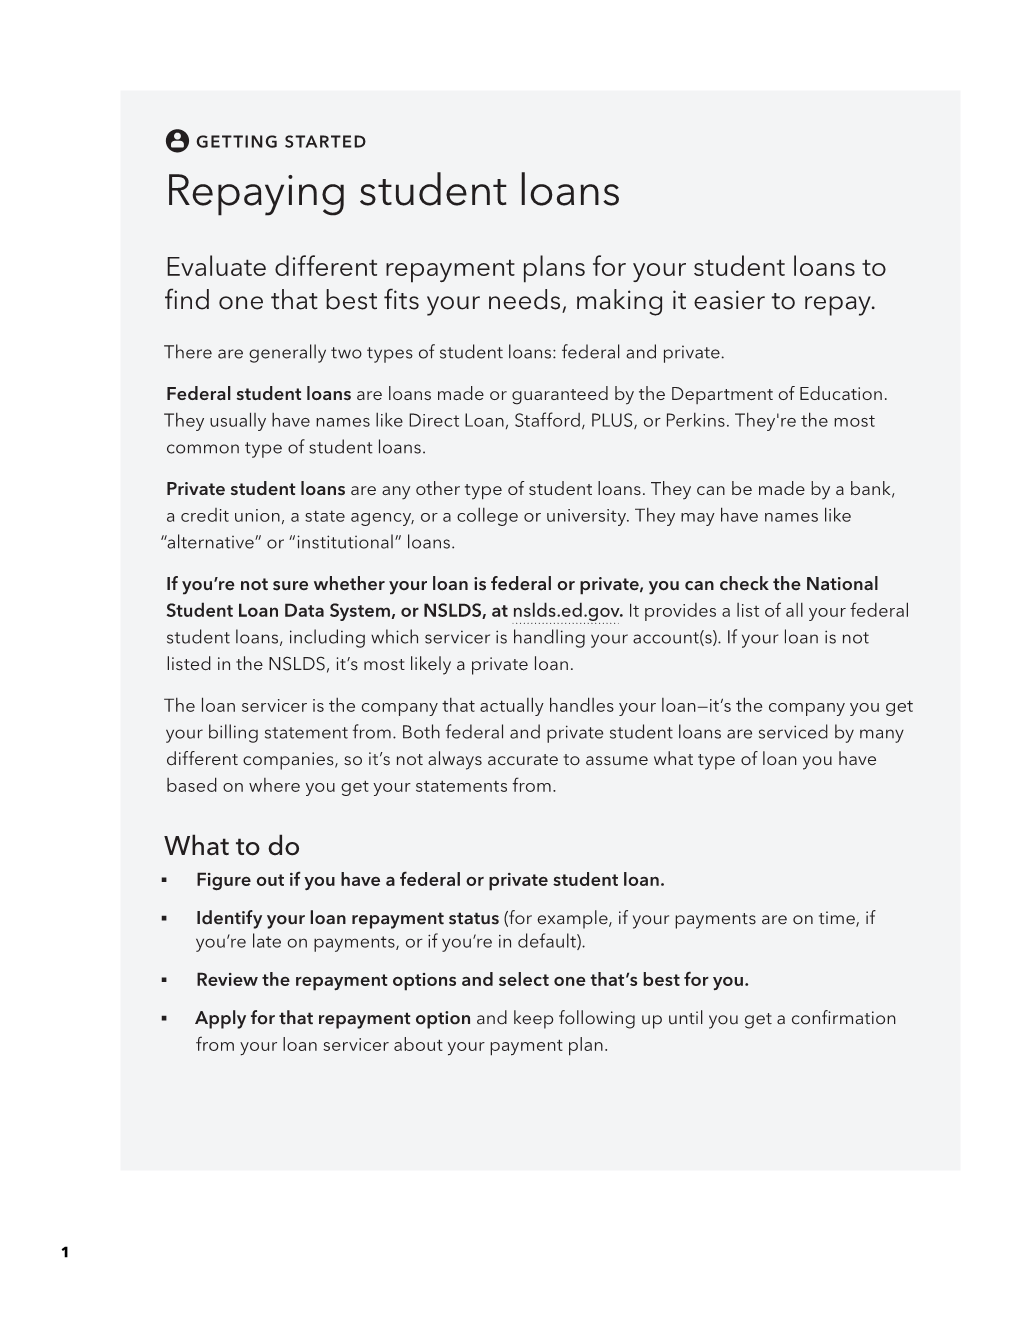 Repaying Student Loans